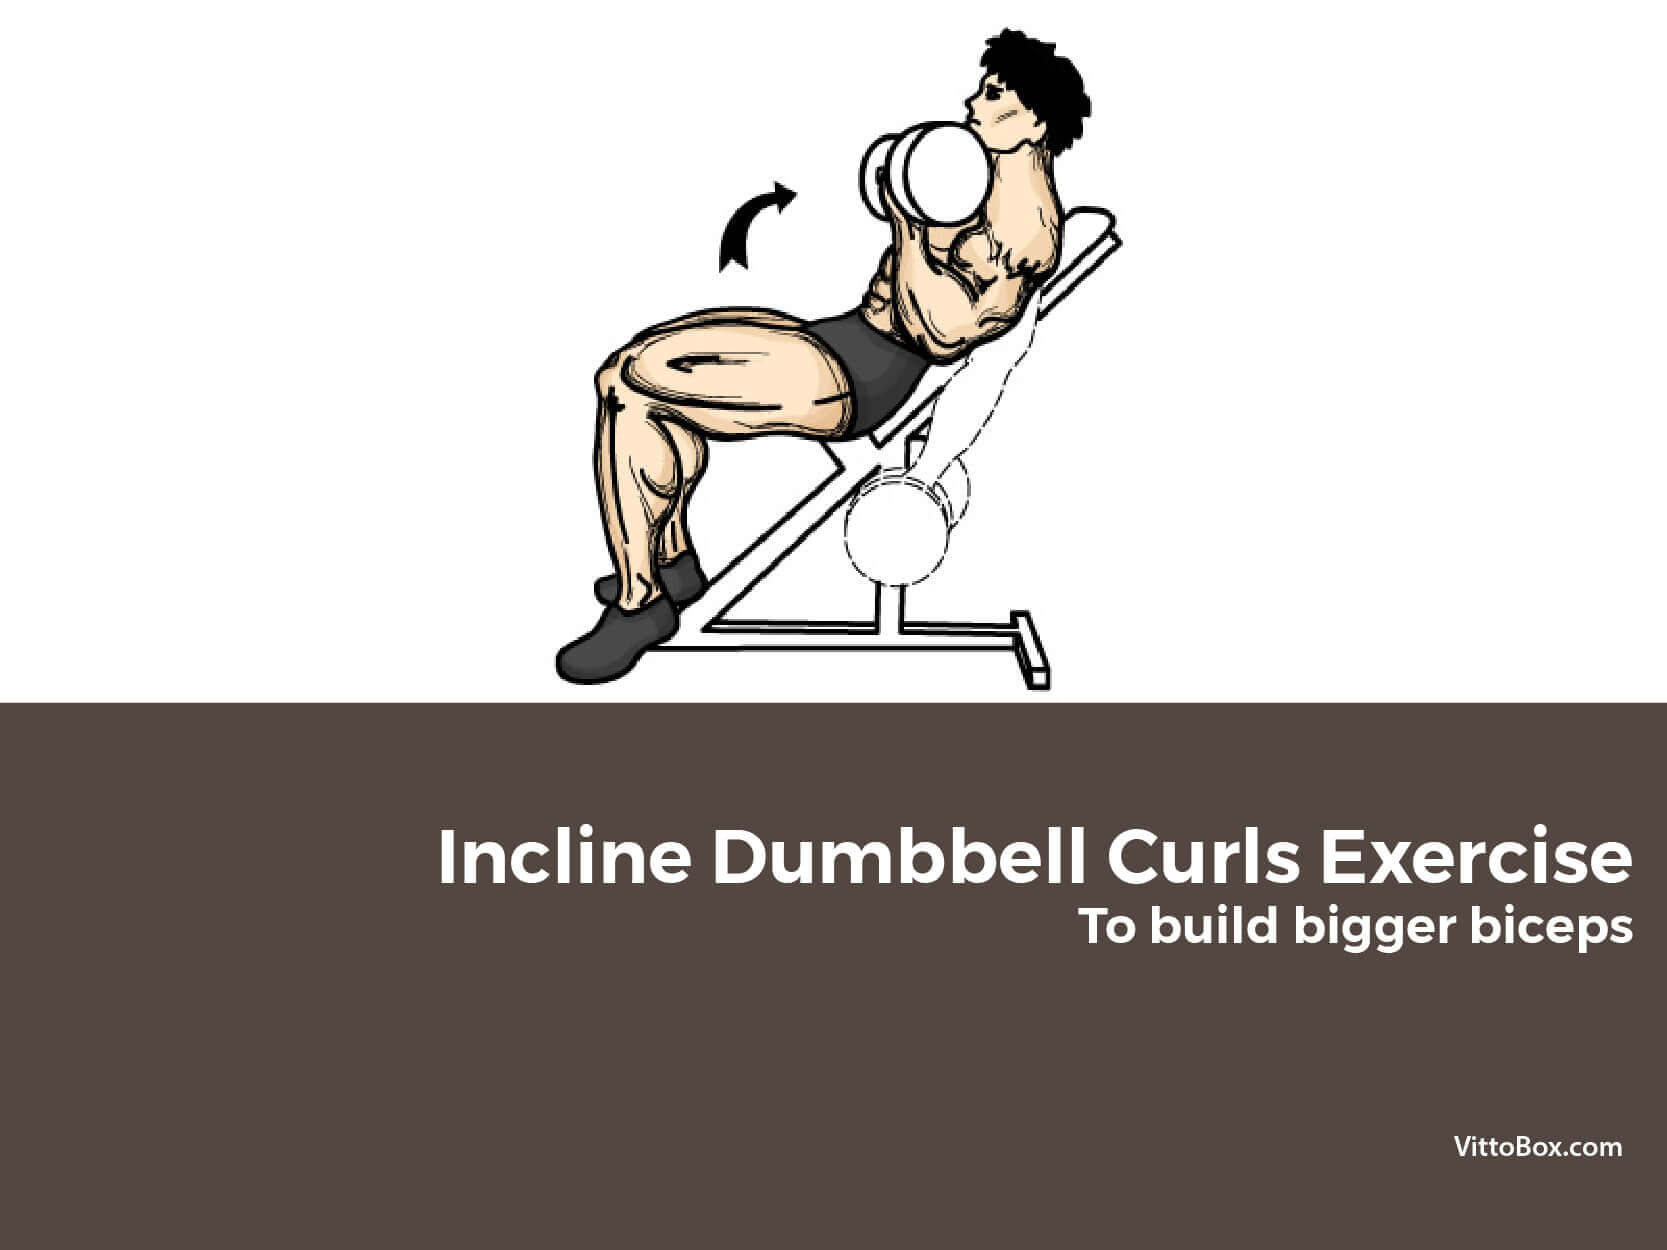 Incline Dumbbell Curls Exercise To Build Bigger Biceps